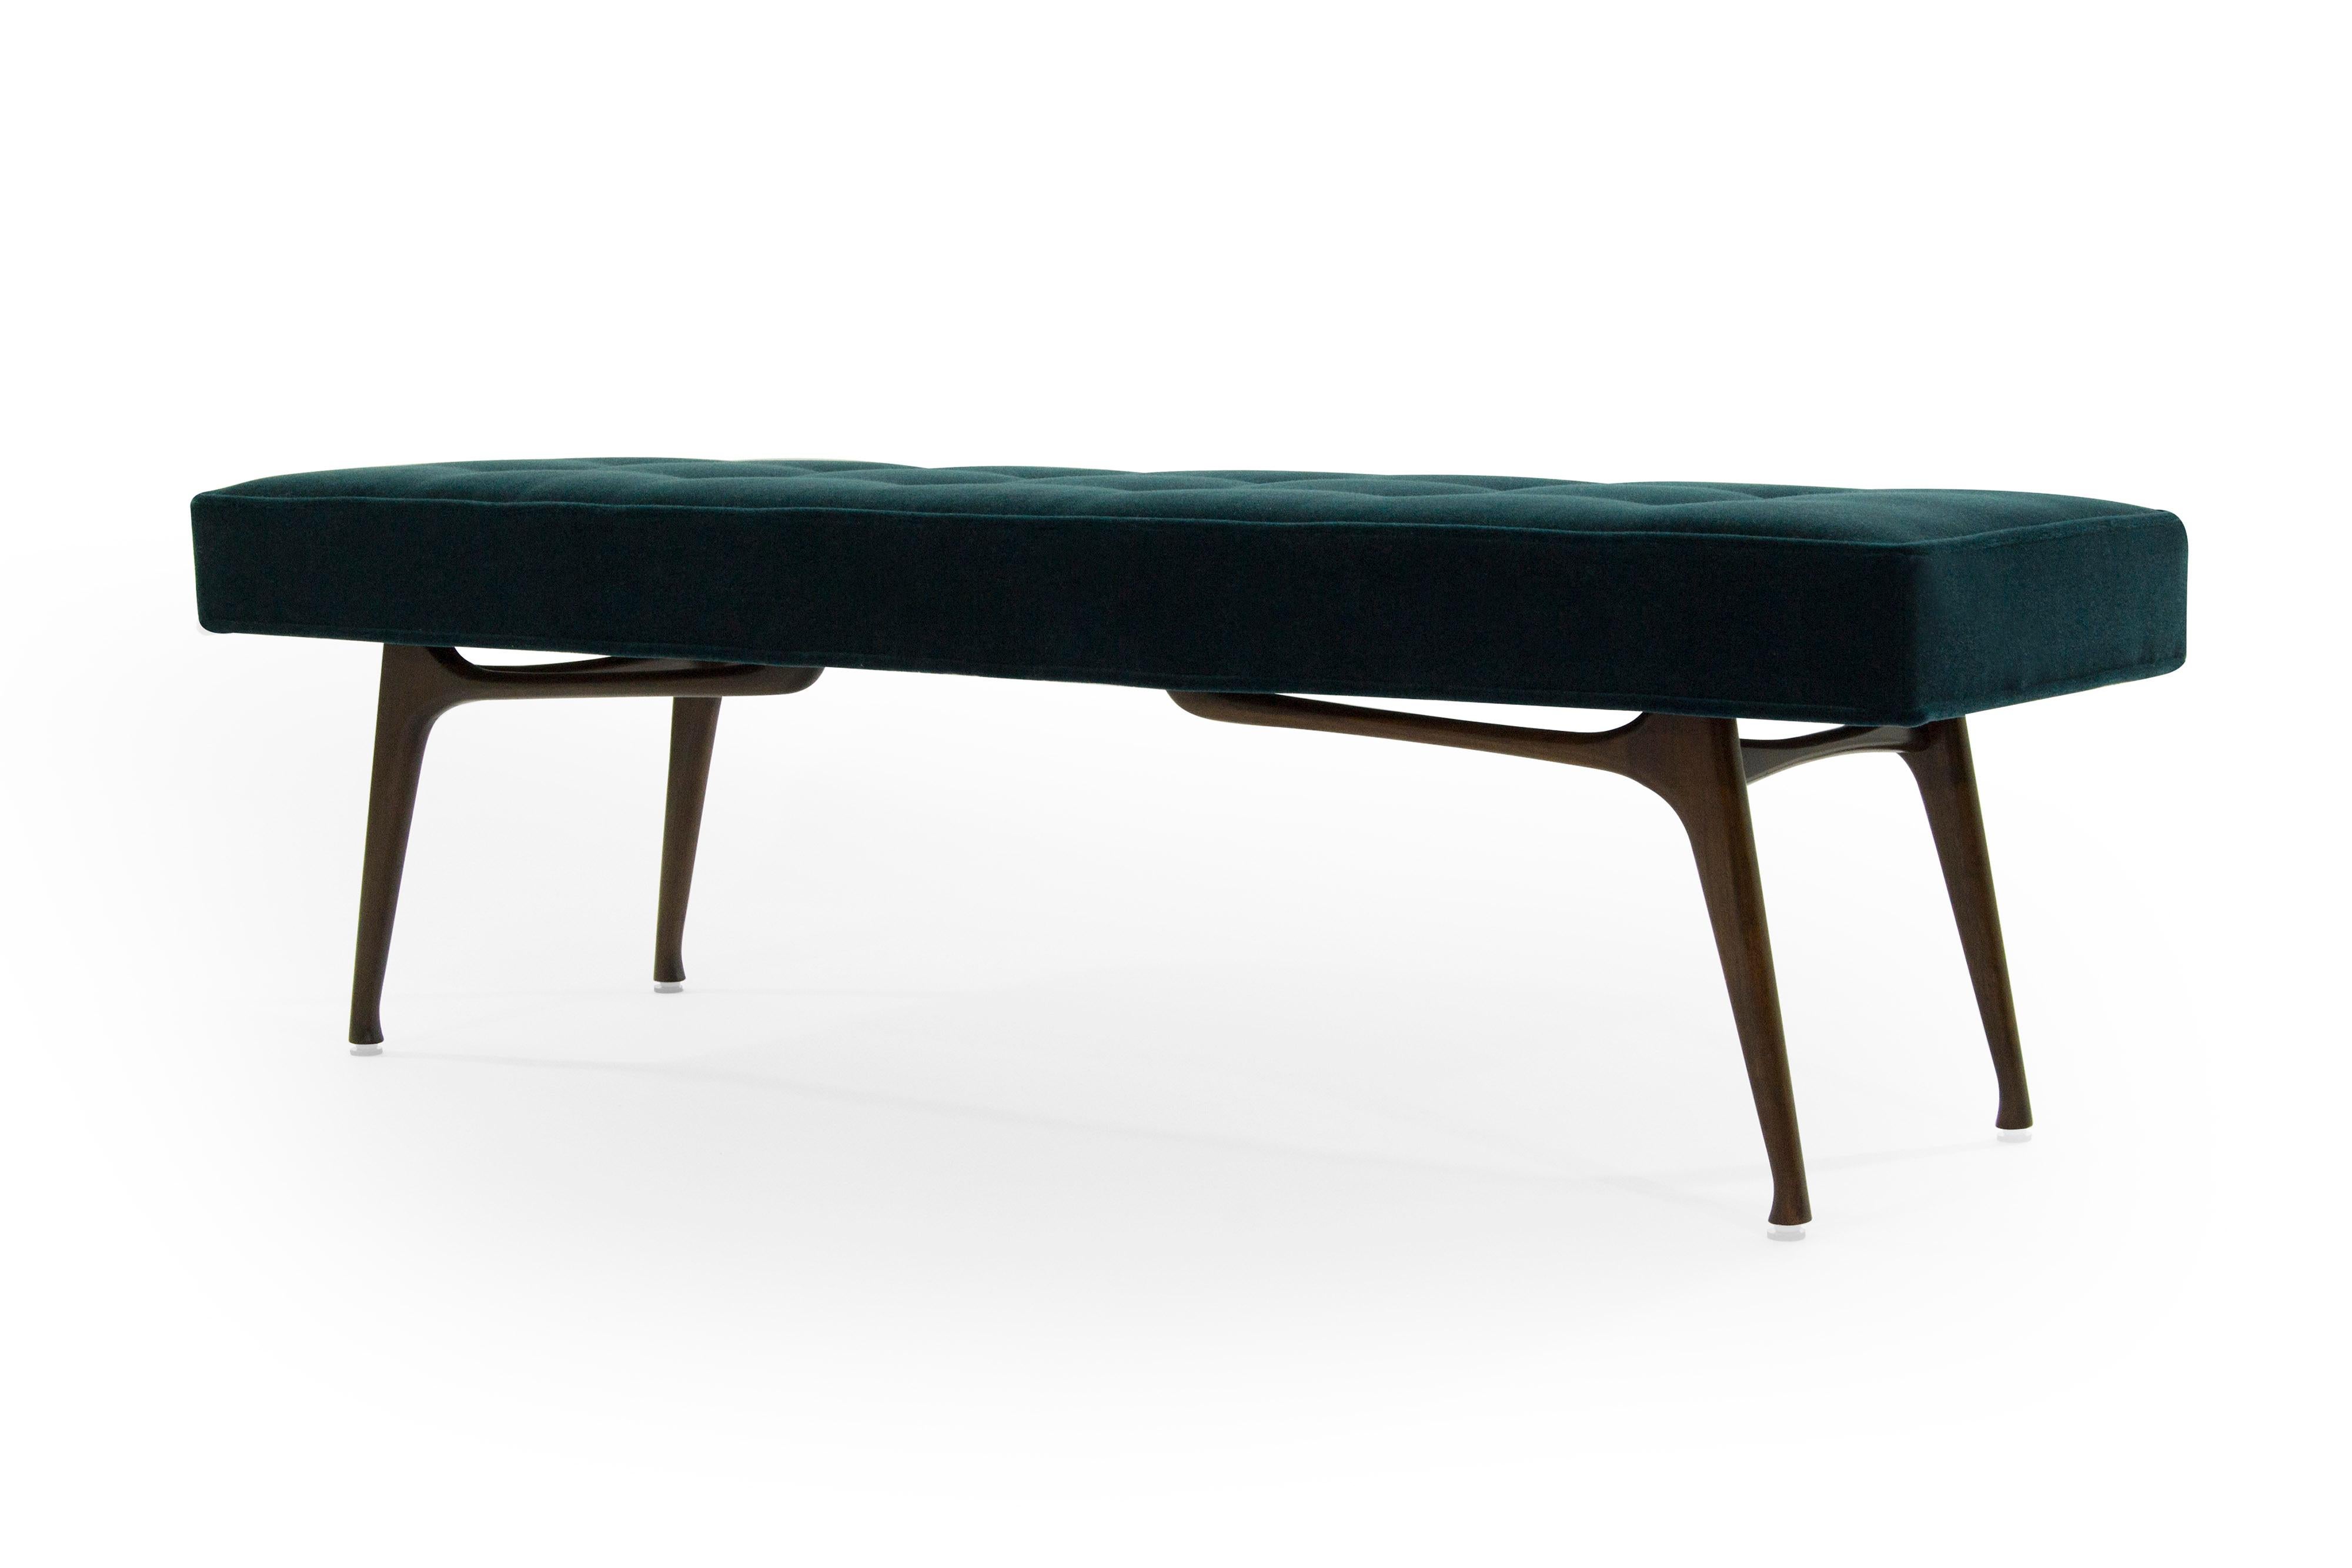 Bench featuring fully restored sculptural walnut legs in the style of Ico Parisi, Italy, circa 1950s.

Newly upholstered in teal mohair by Holly Hunt.